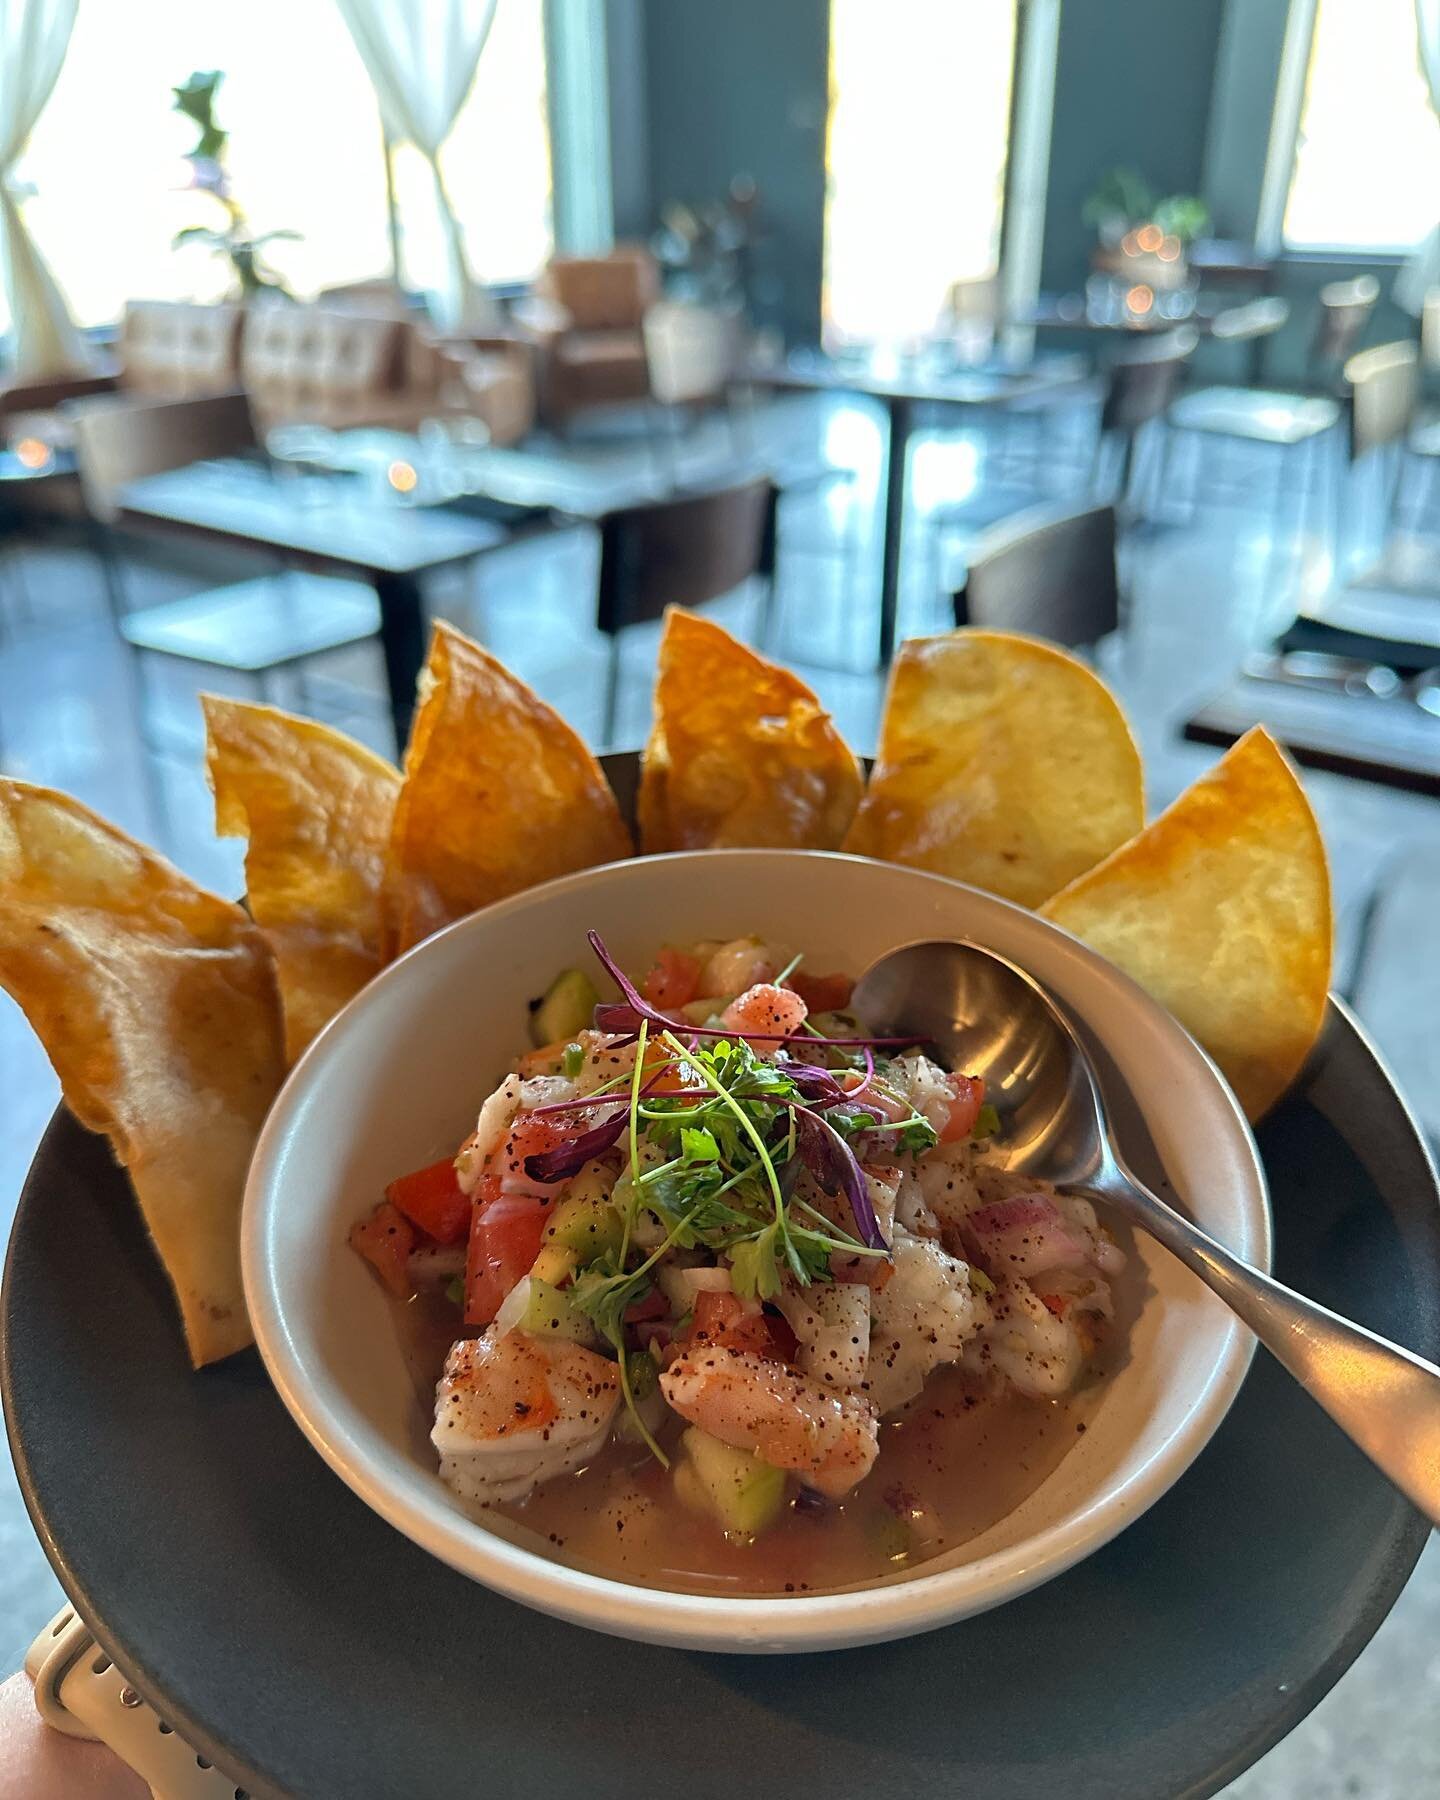 Our ceviche is the perfect way to start your meal at Barbacoa. Light, savory and limey, each bite is more delicious than the one before. 

We&rsquo;ve got reservations available each night this week. The link in our bio will take you to the online pl